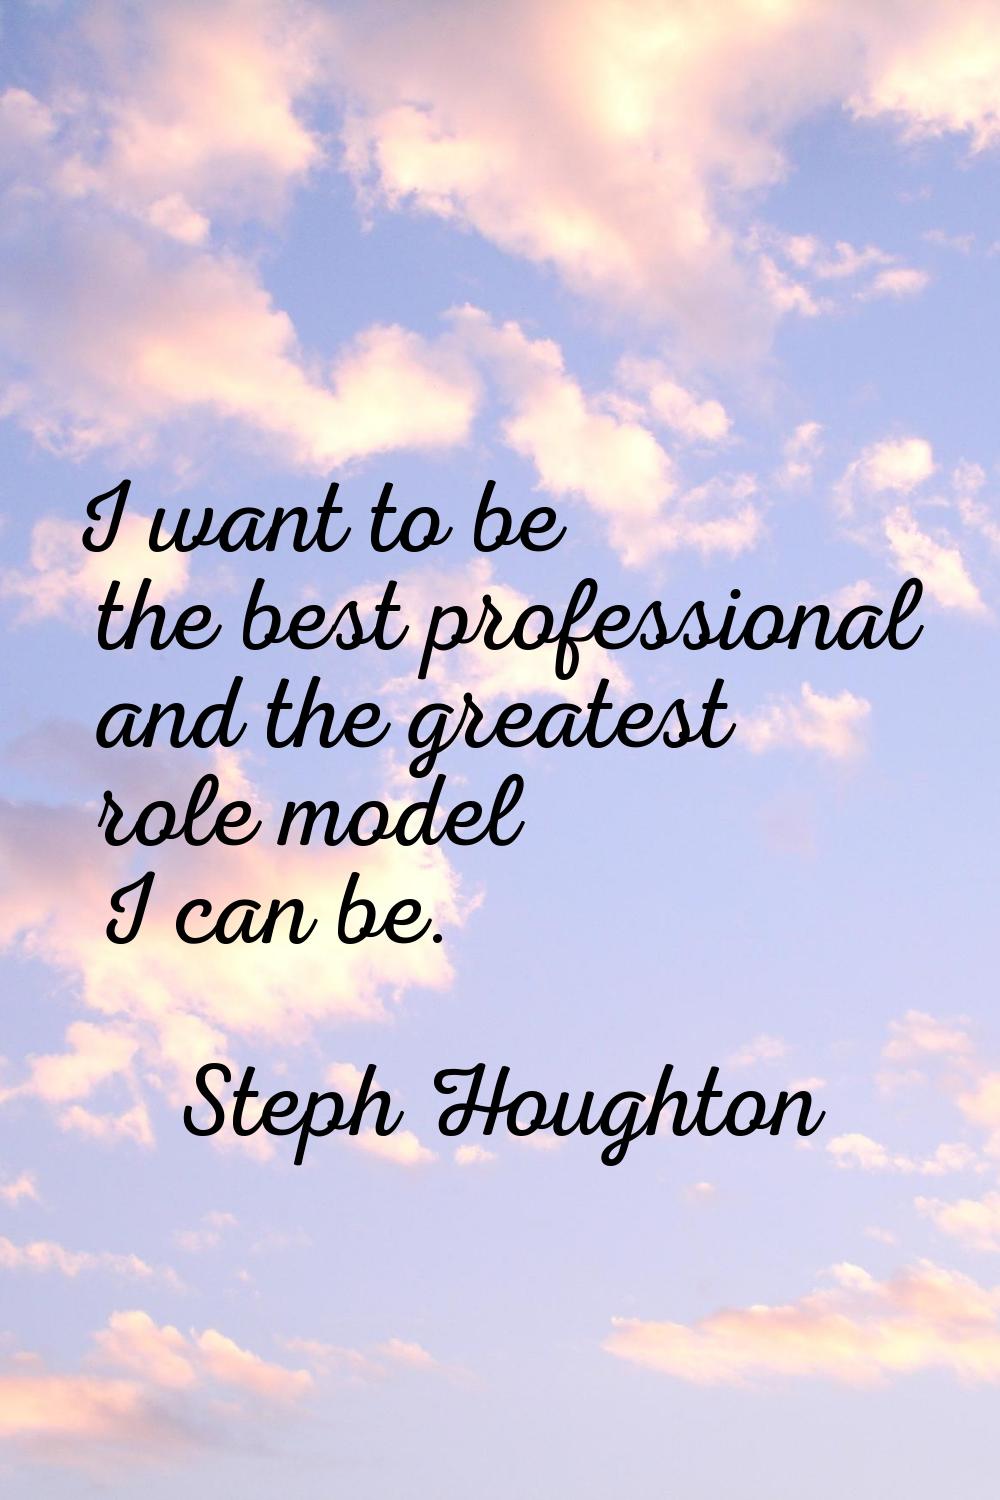 I want to be the best professional and the greatest role model I can be.